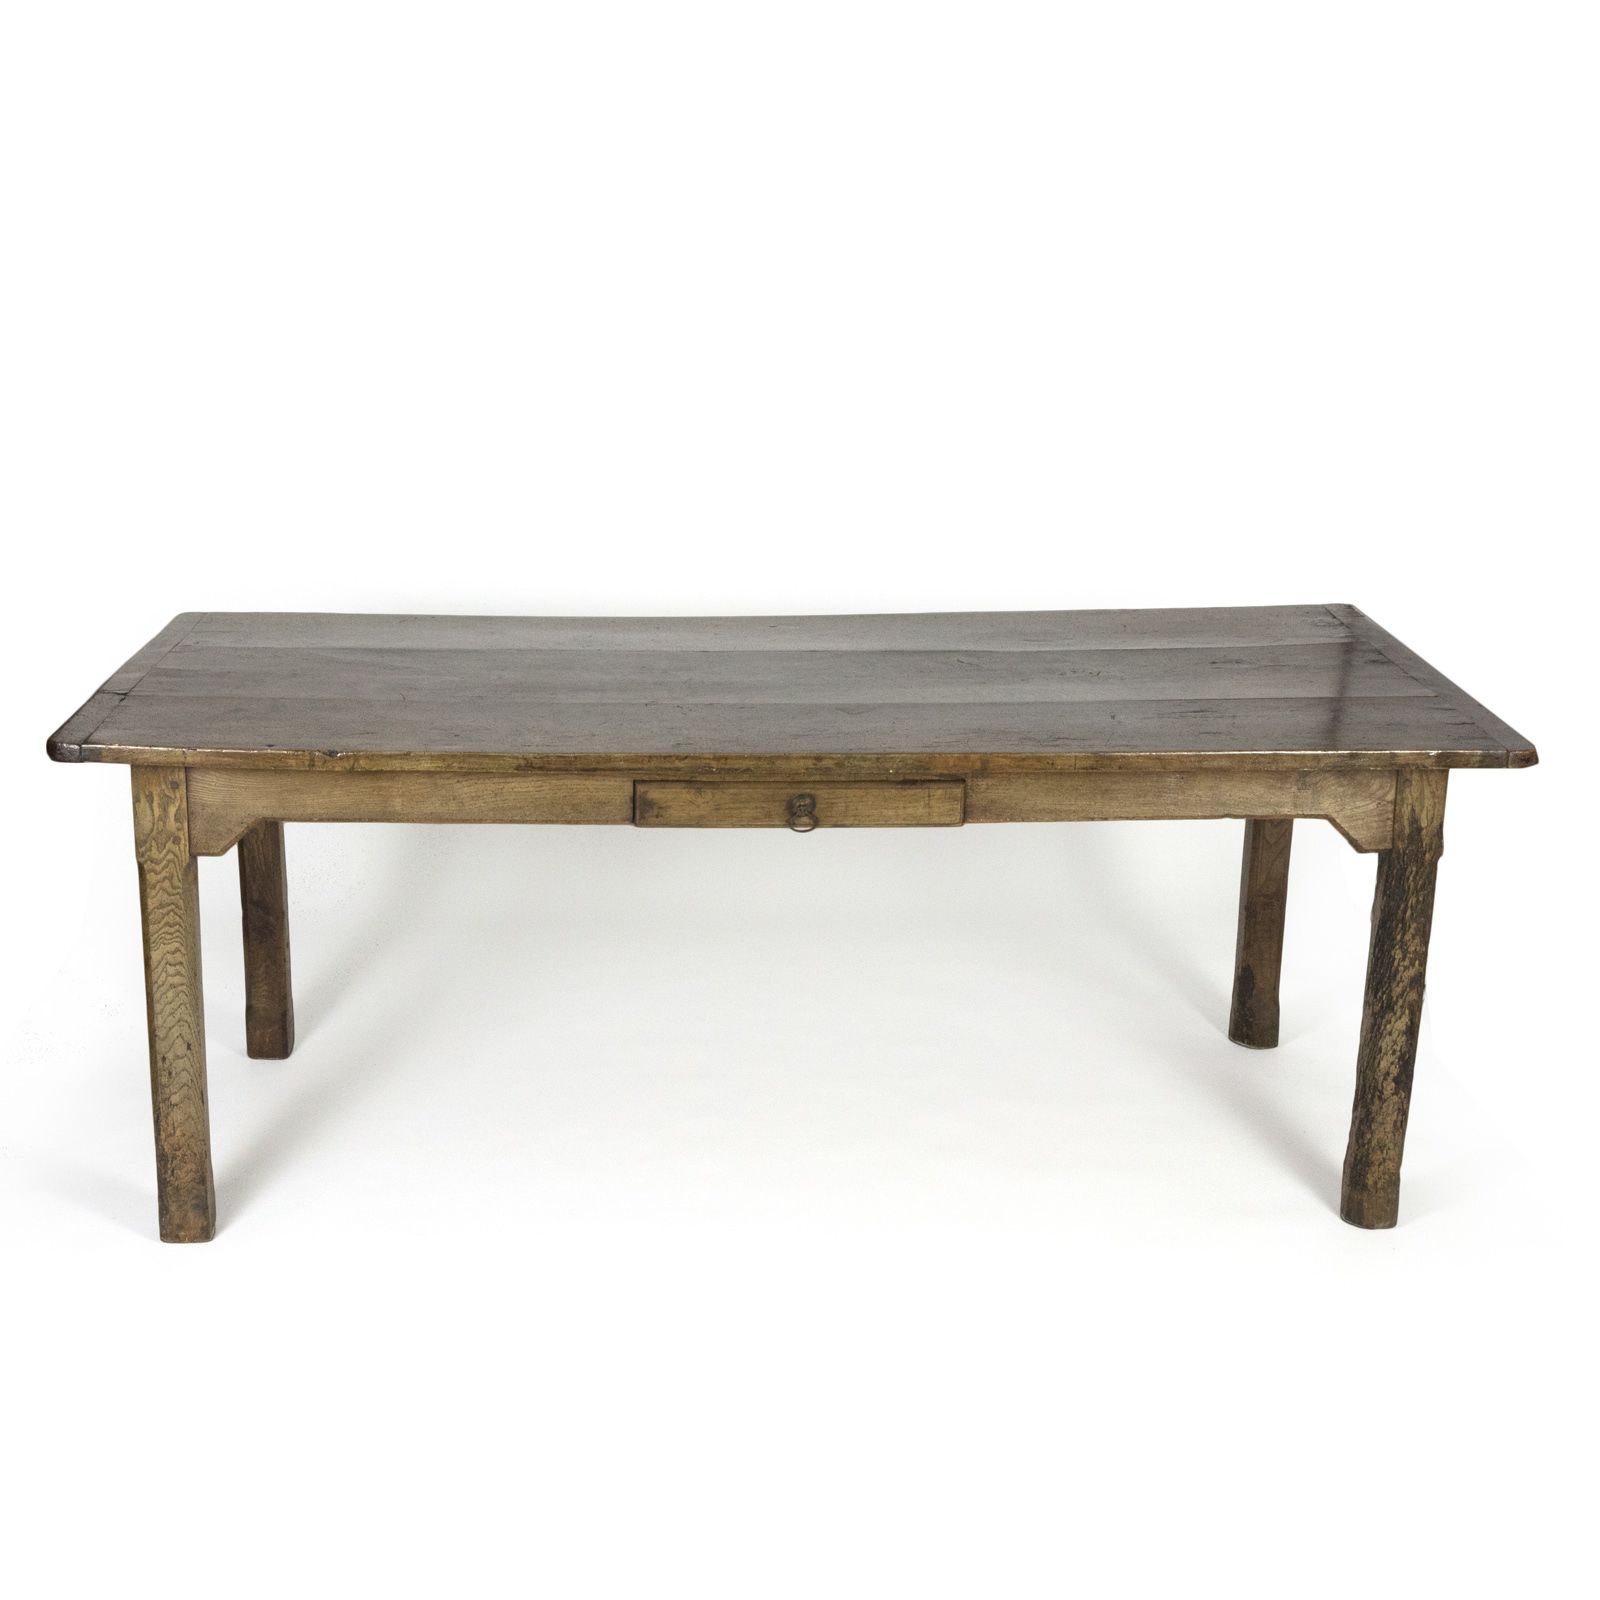 Authentic English Country Farm Table, 19th Century (415) 355 1690 Intended For Reclaimed Fruitwood Coffee Tables (Gallery 20 of 20)